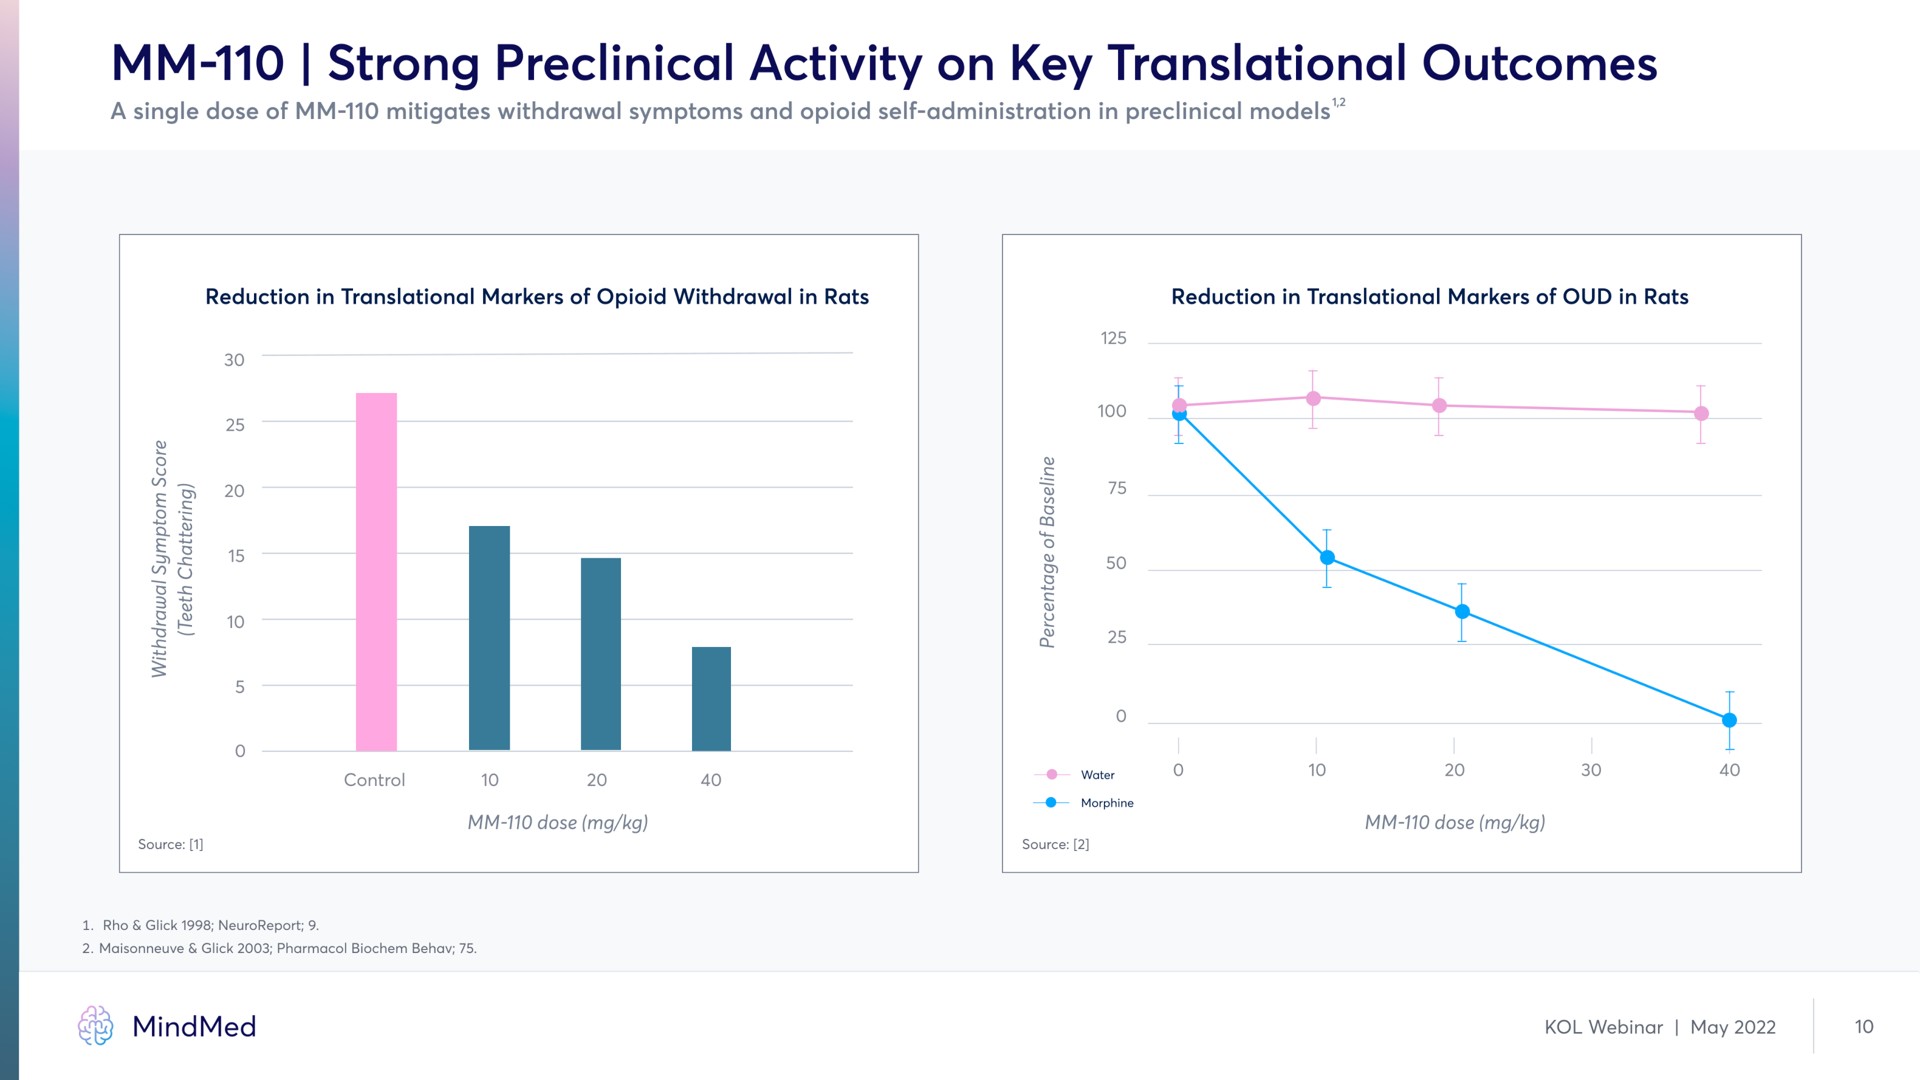 strong preclinical activity on key translational outcomes | MindMed